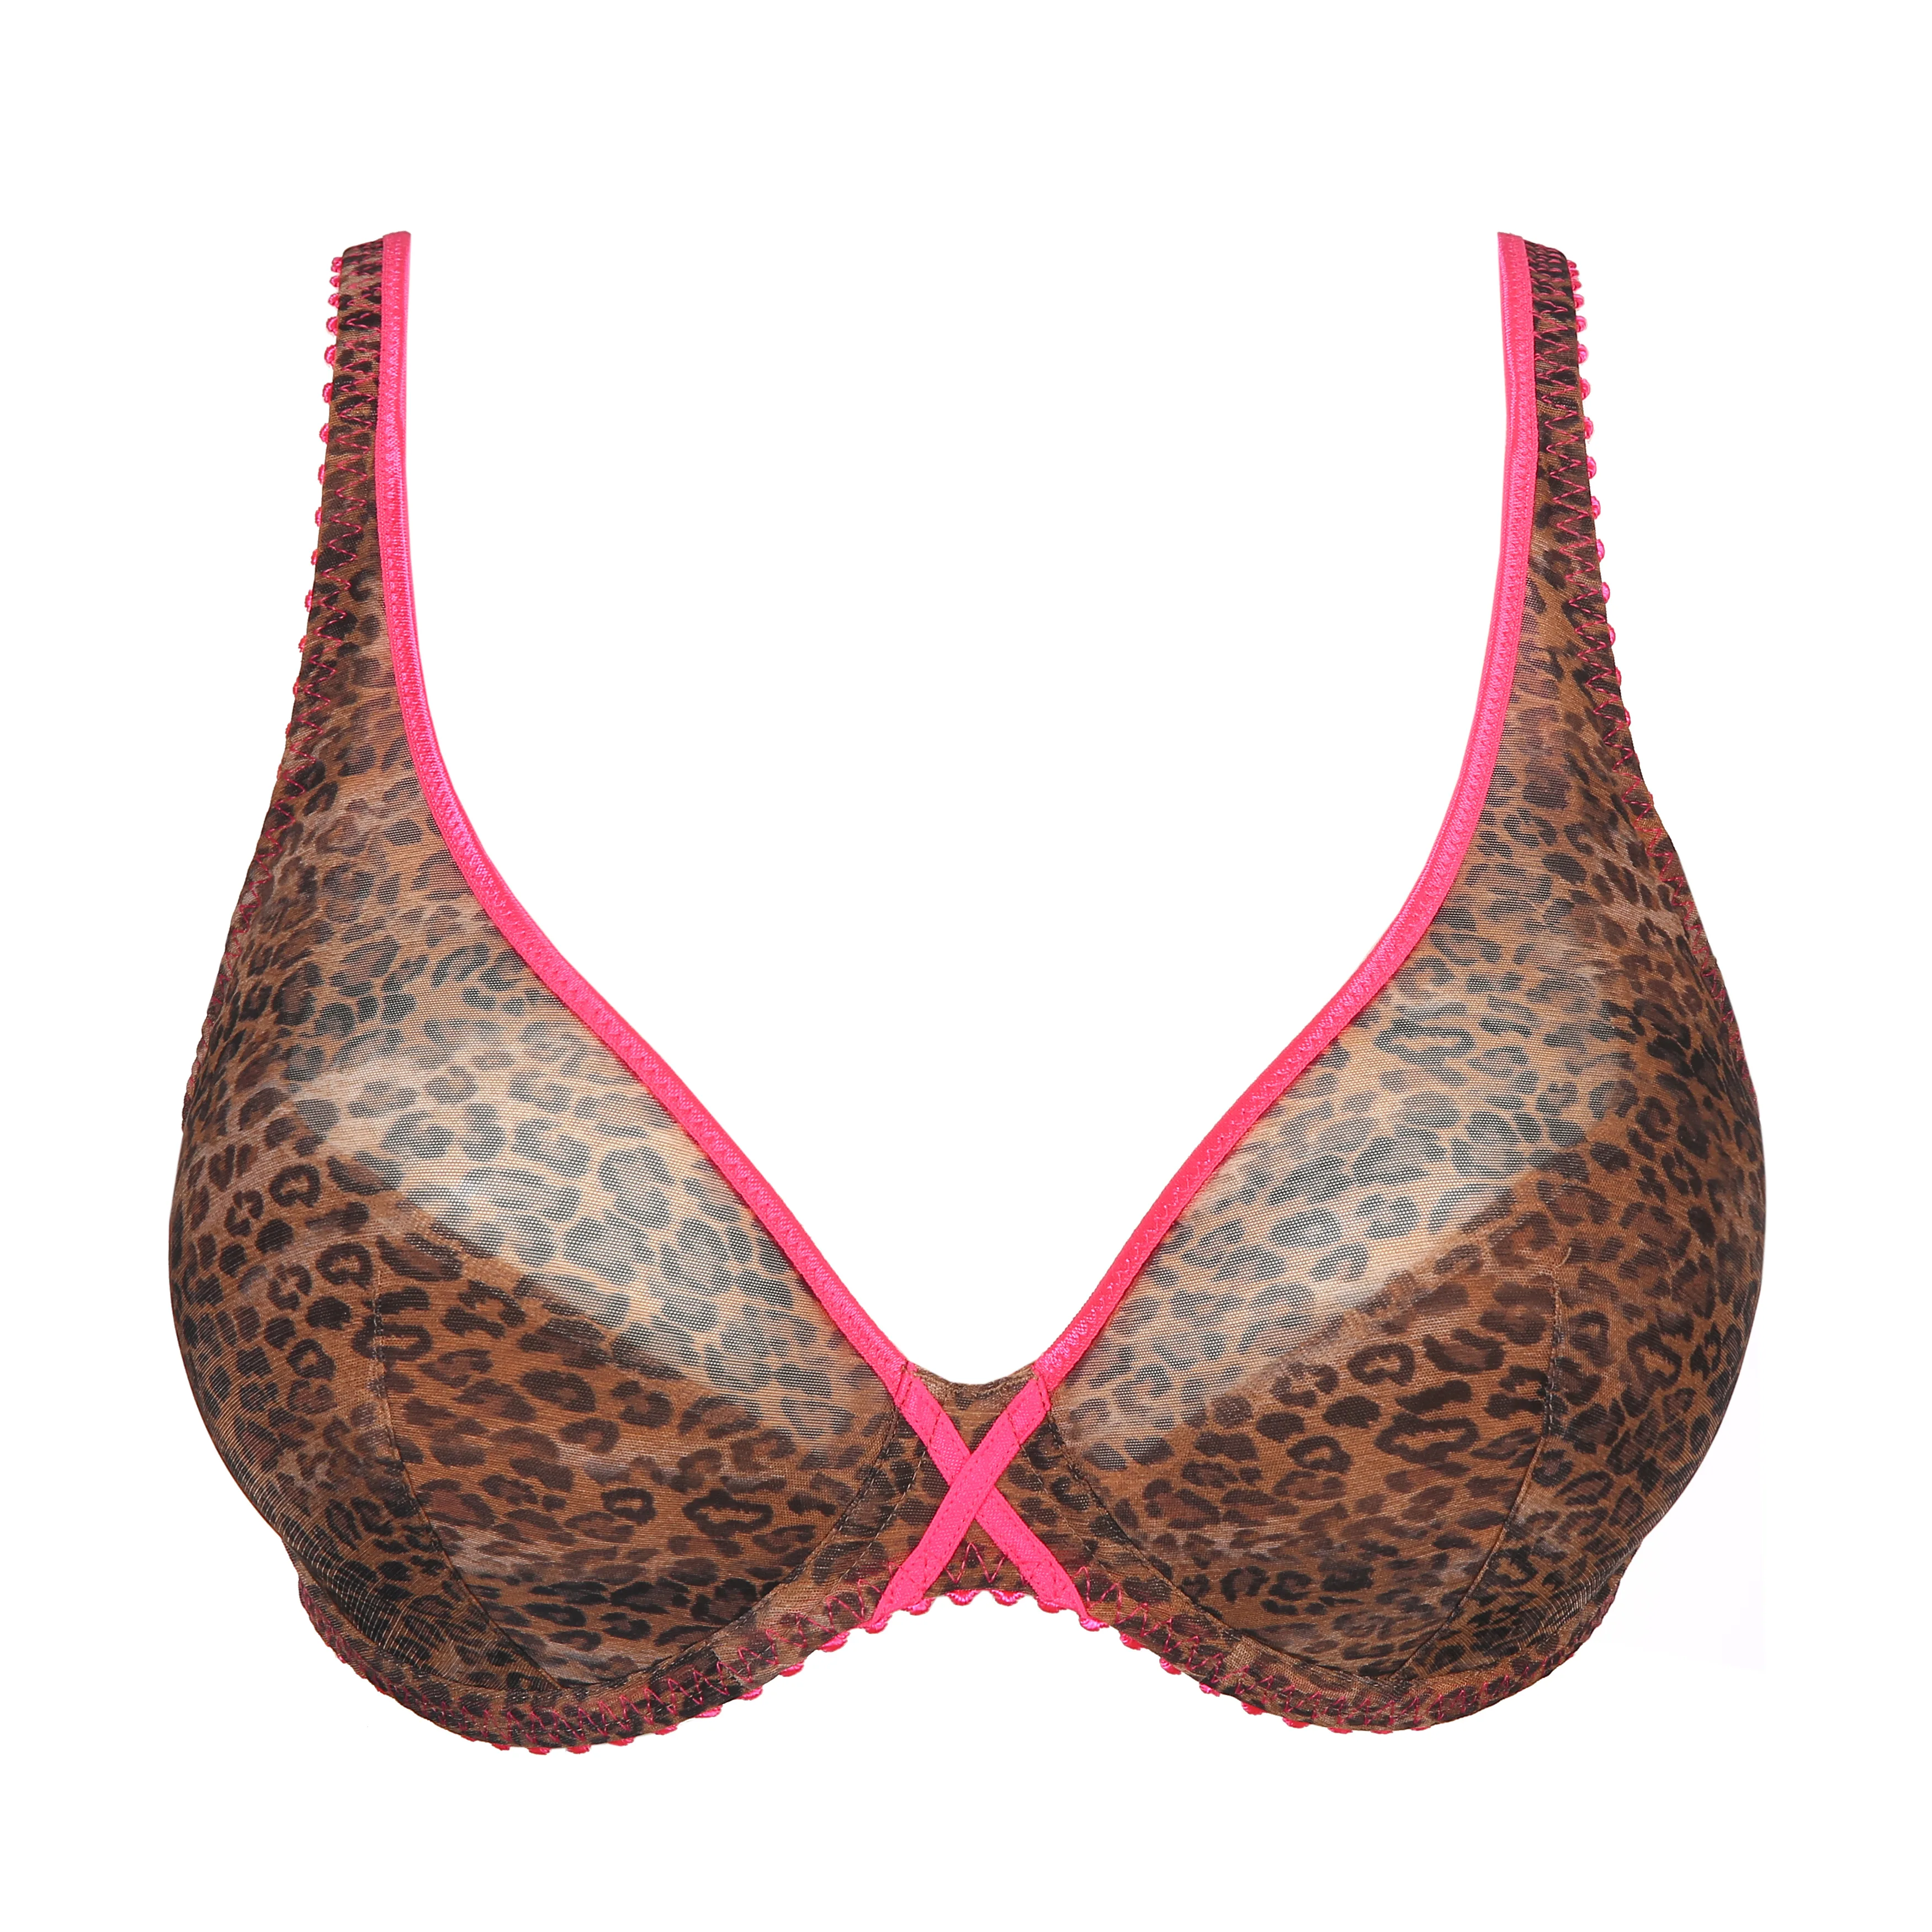 PrimaDonna Twist Cafe Plume padded balcony wire bra C-H cup, color cheetah  - order in online shop